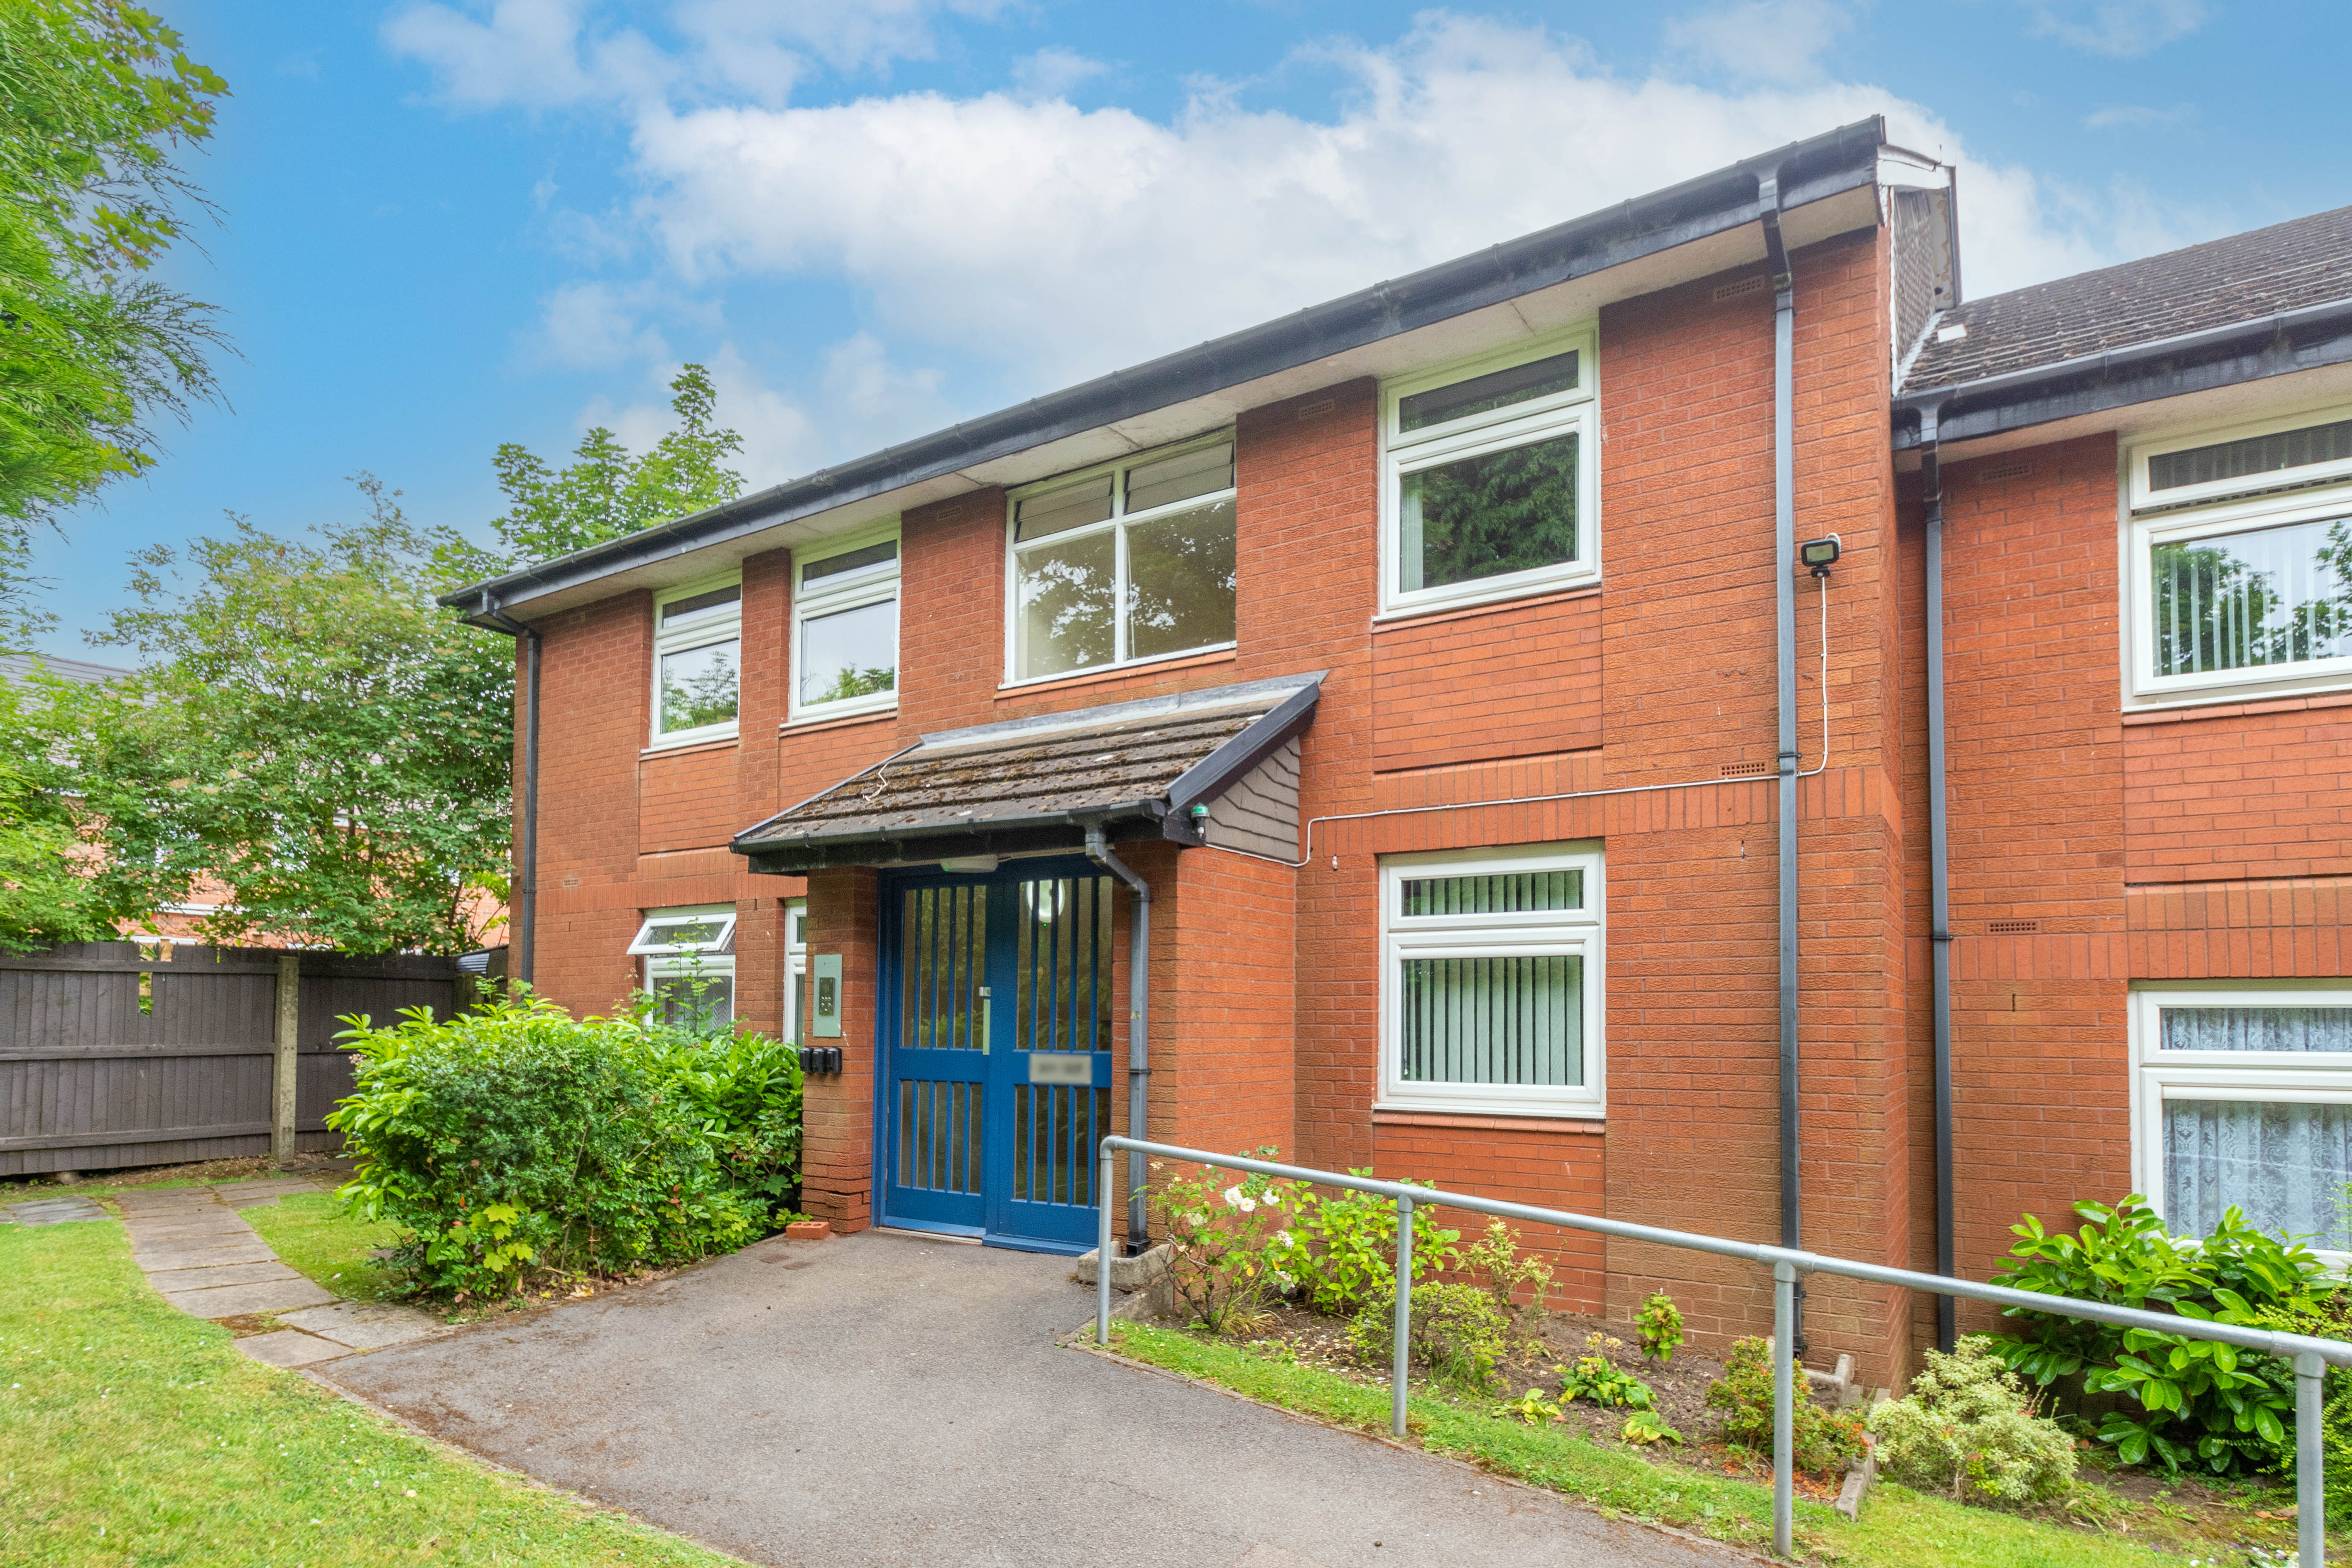 1 bed apartment for sale in Frankley Beeches Road, Birmingham - Property Image 1